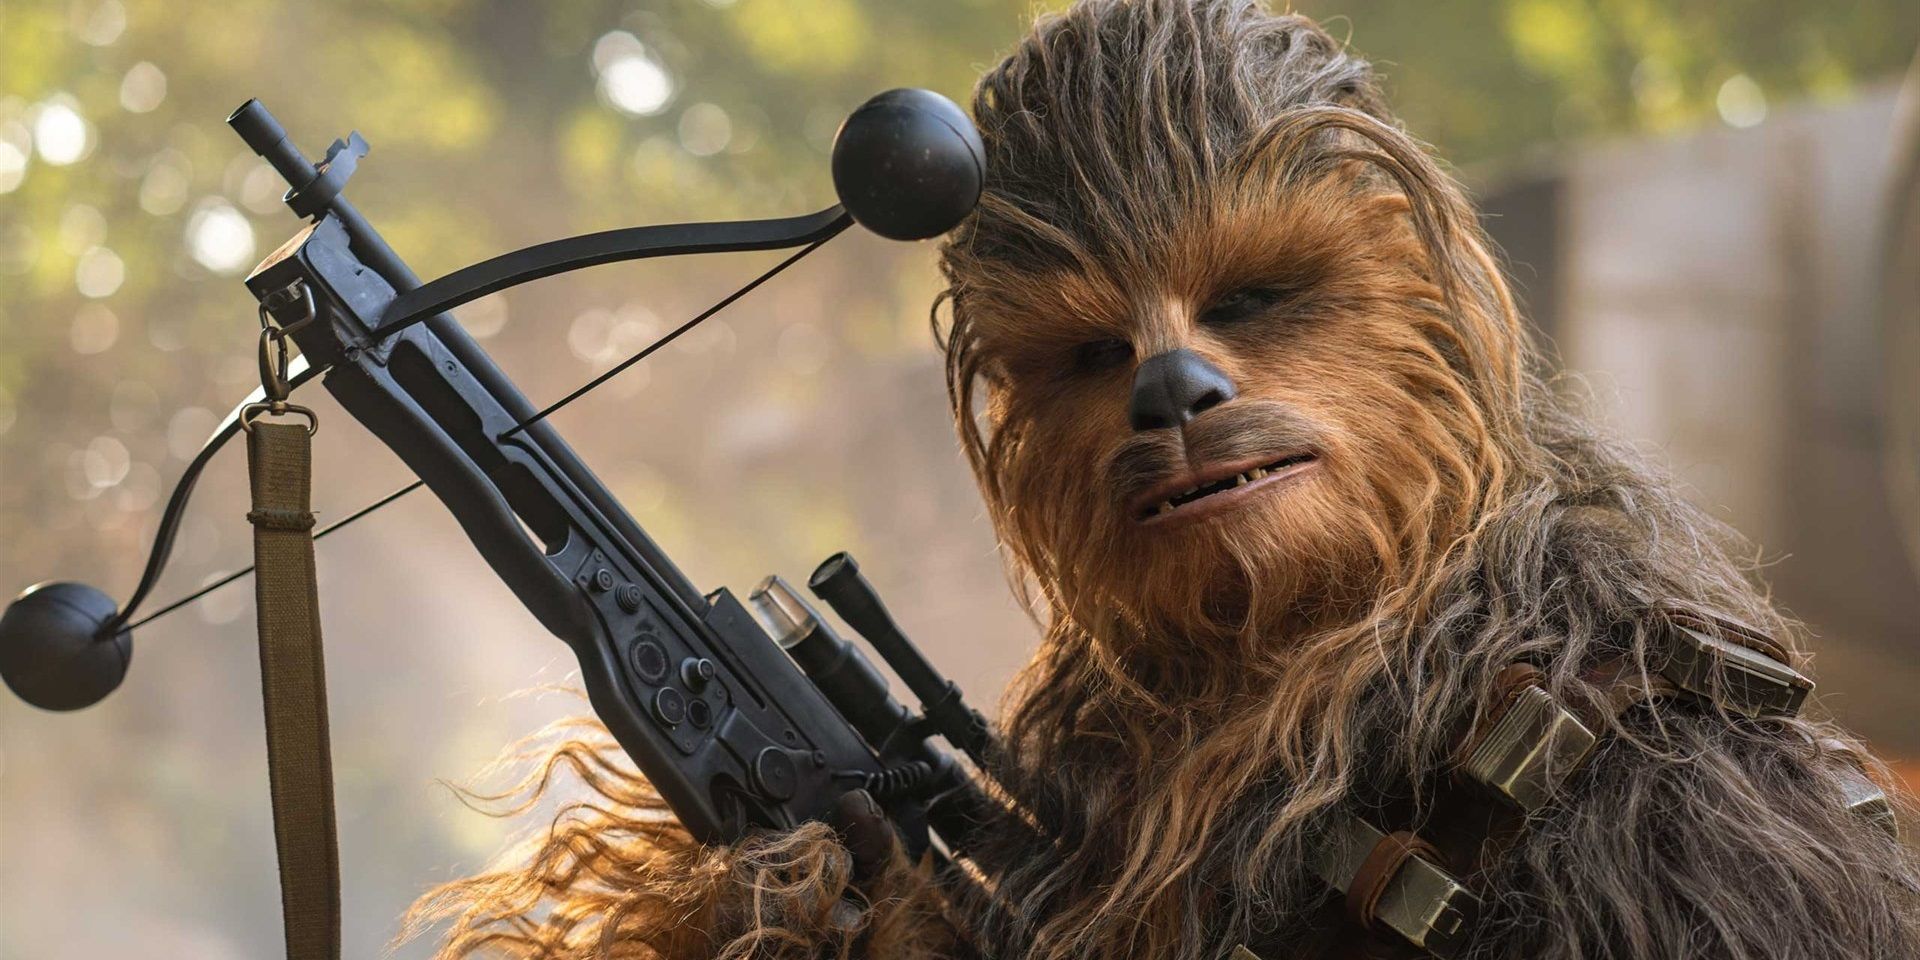 Chewbacca holding his bowcaster